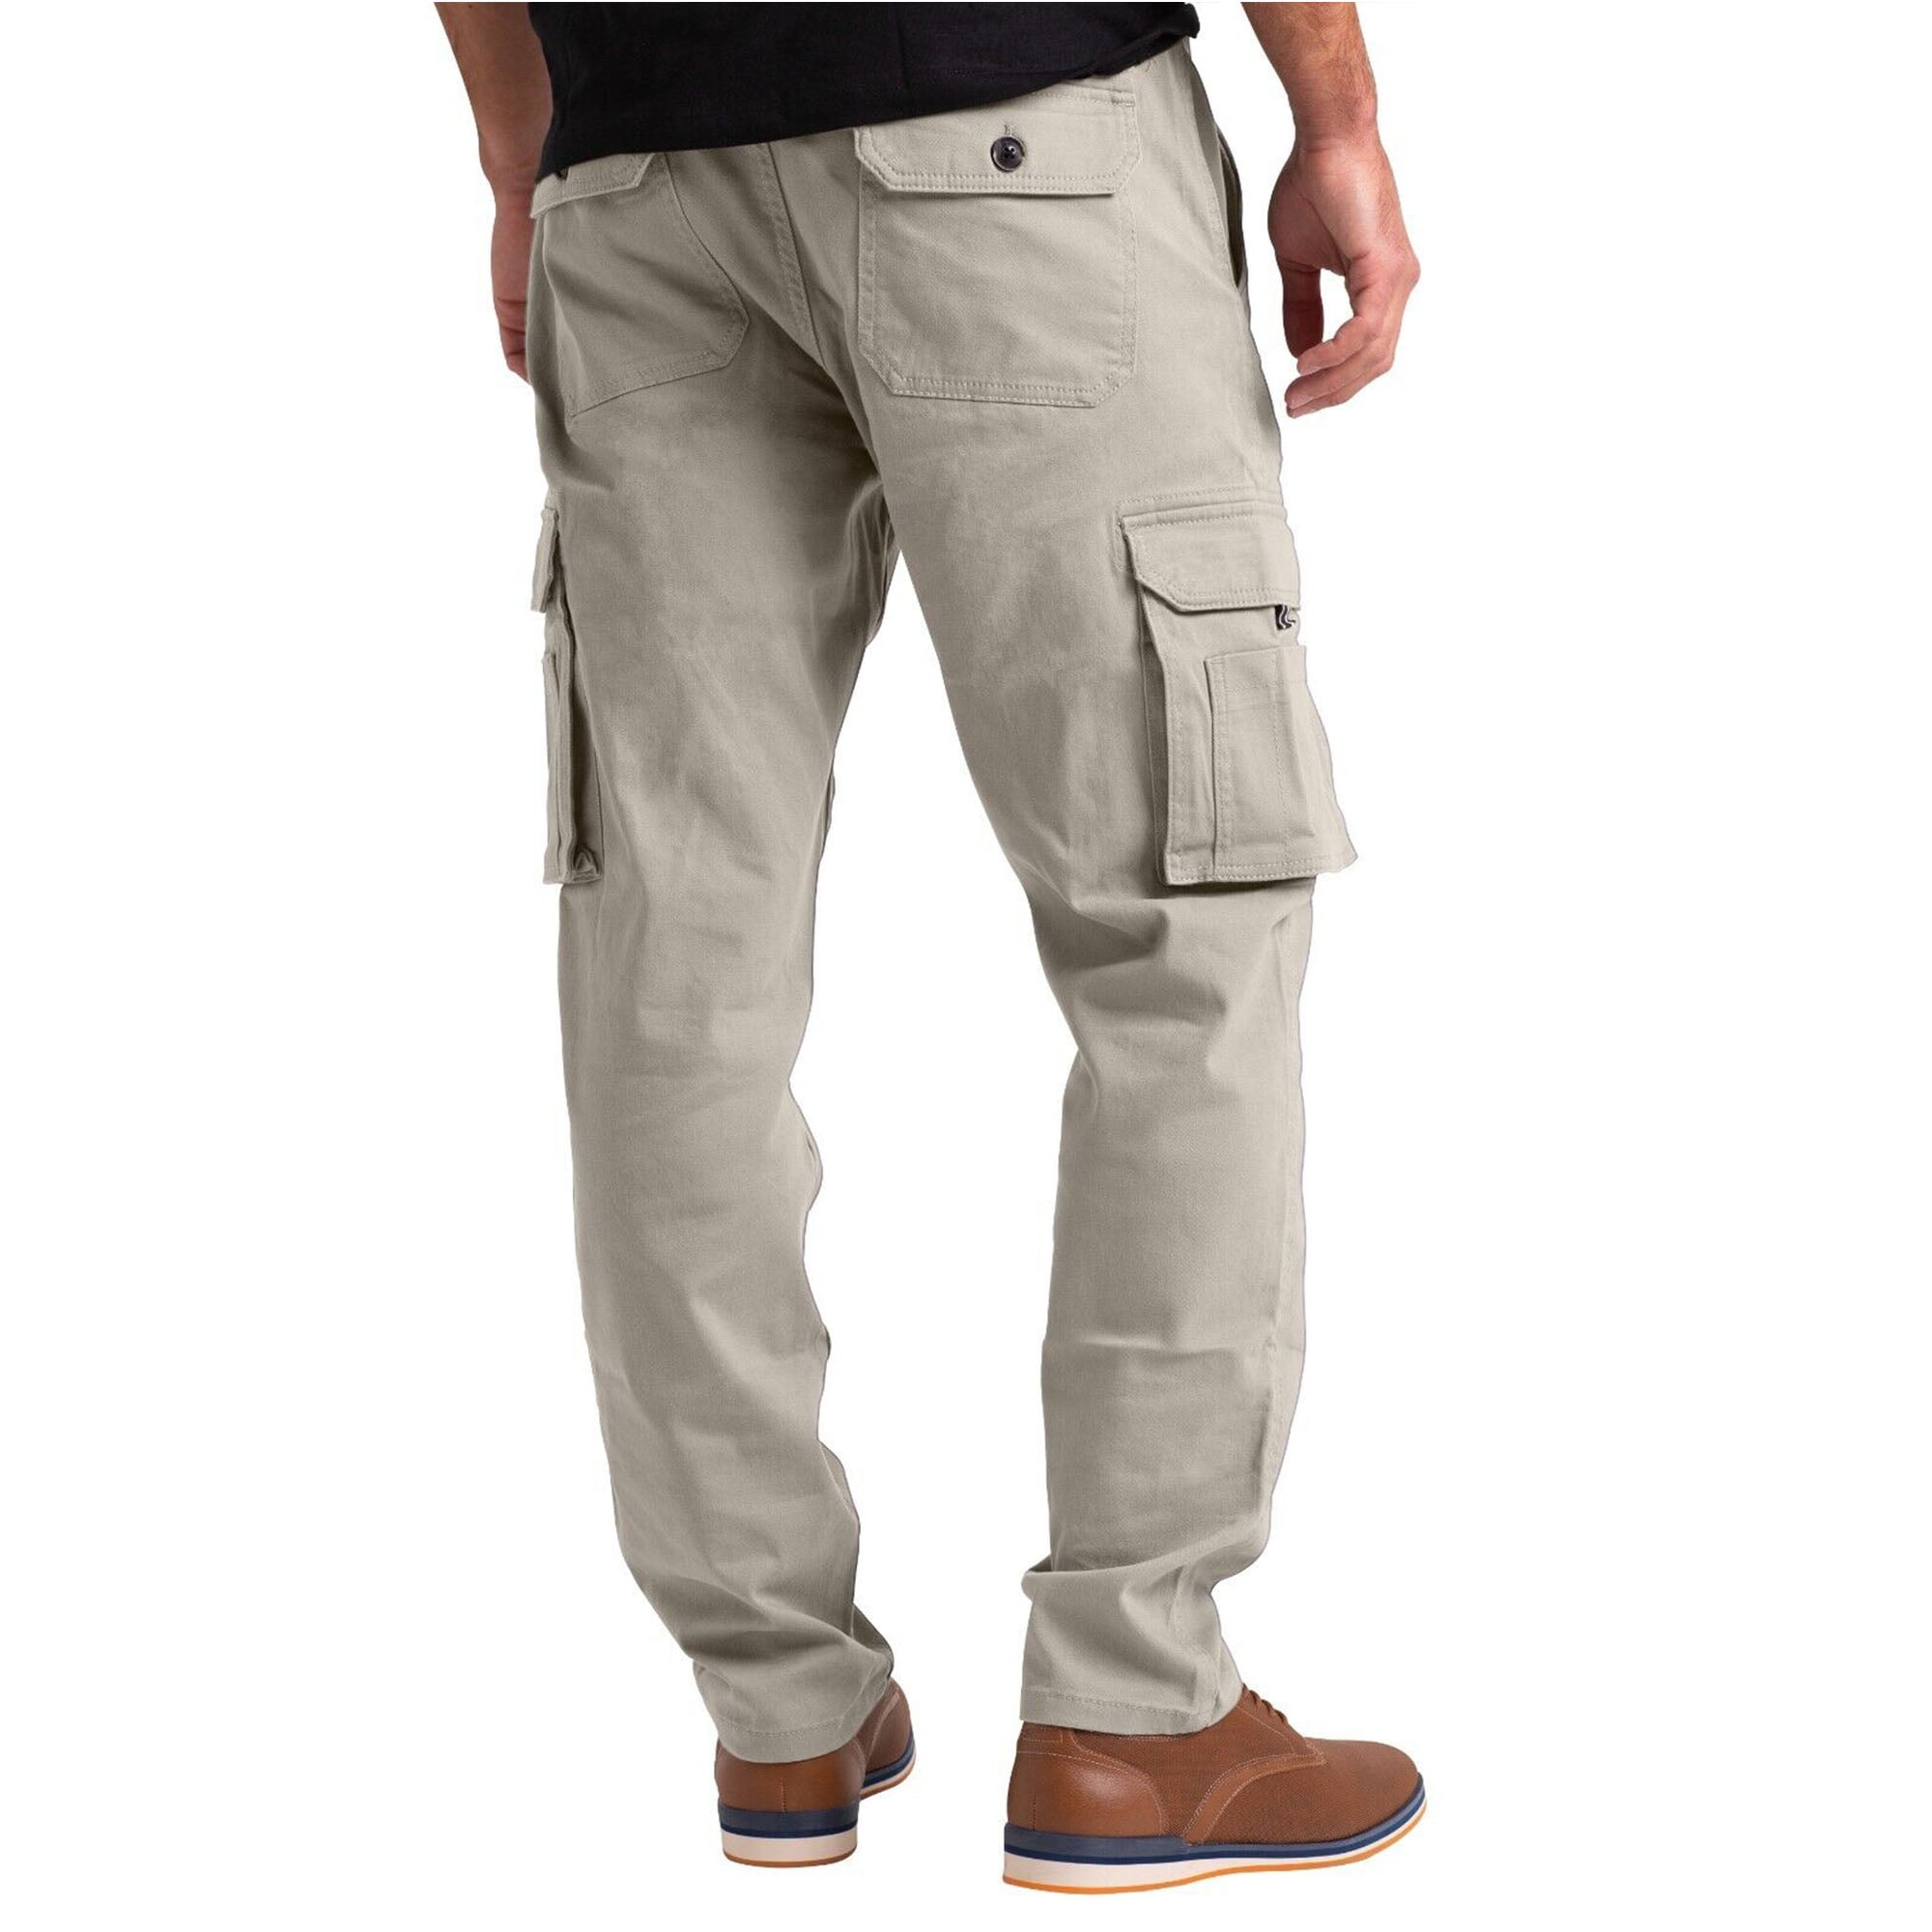 Result Mens Work Pants in Mens Occupational and Workwear - Walmart.com